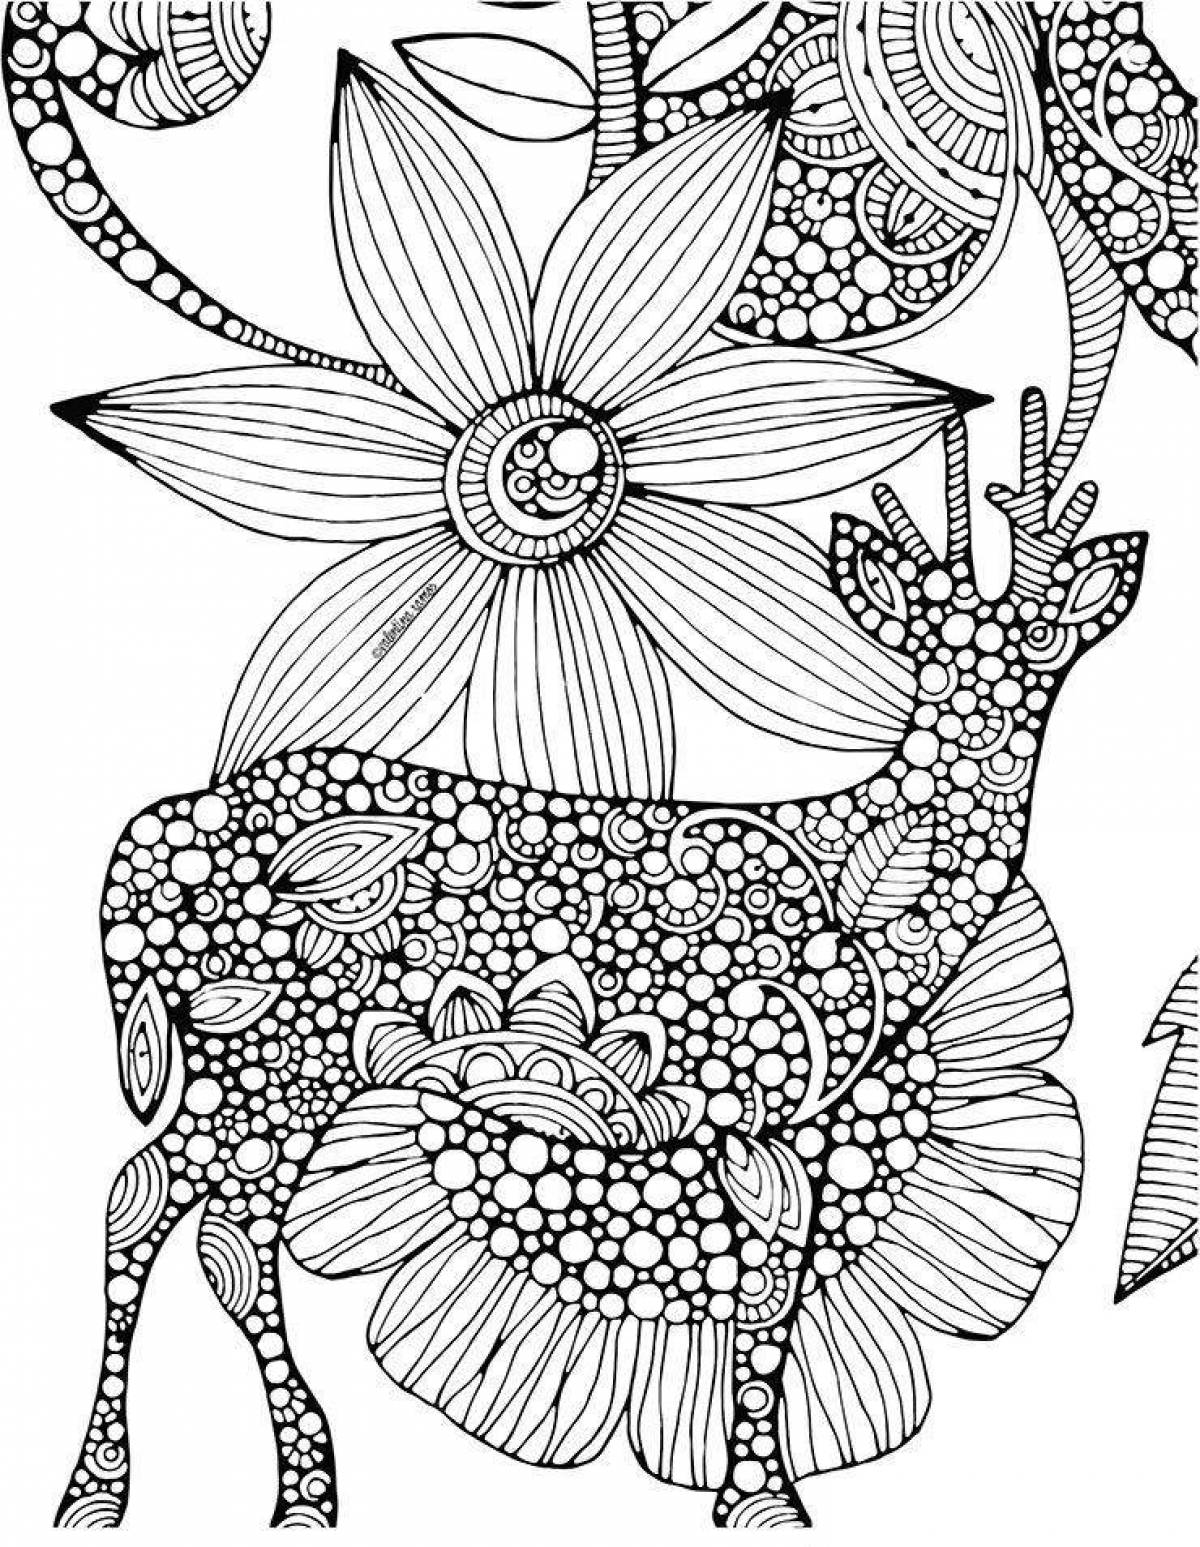 Relaxing anti-stress art therapy coloring book